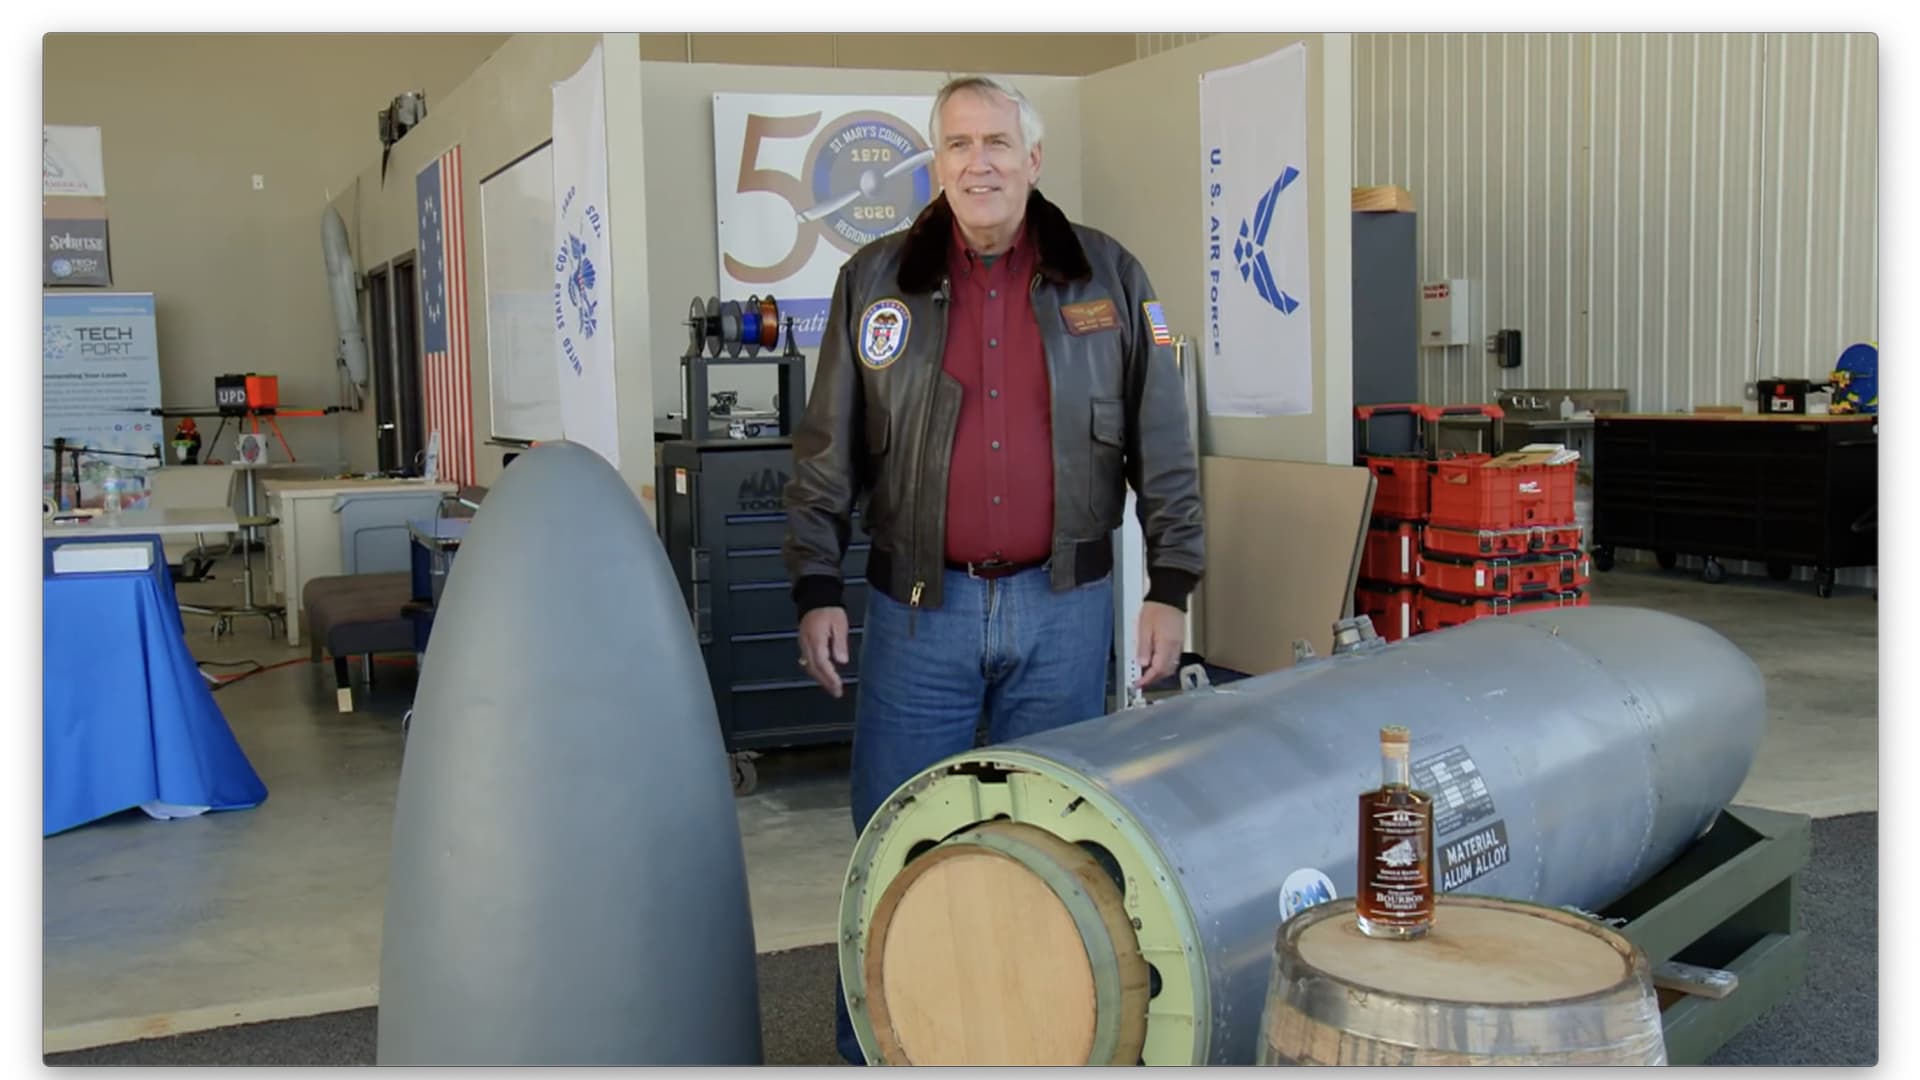 Retired Navy Rear Adm. Scott Sanders explains how the Harrier's reconfigured fuel tank can hold two 25-gallon barrels of bourbon.